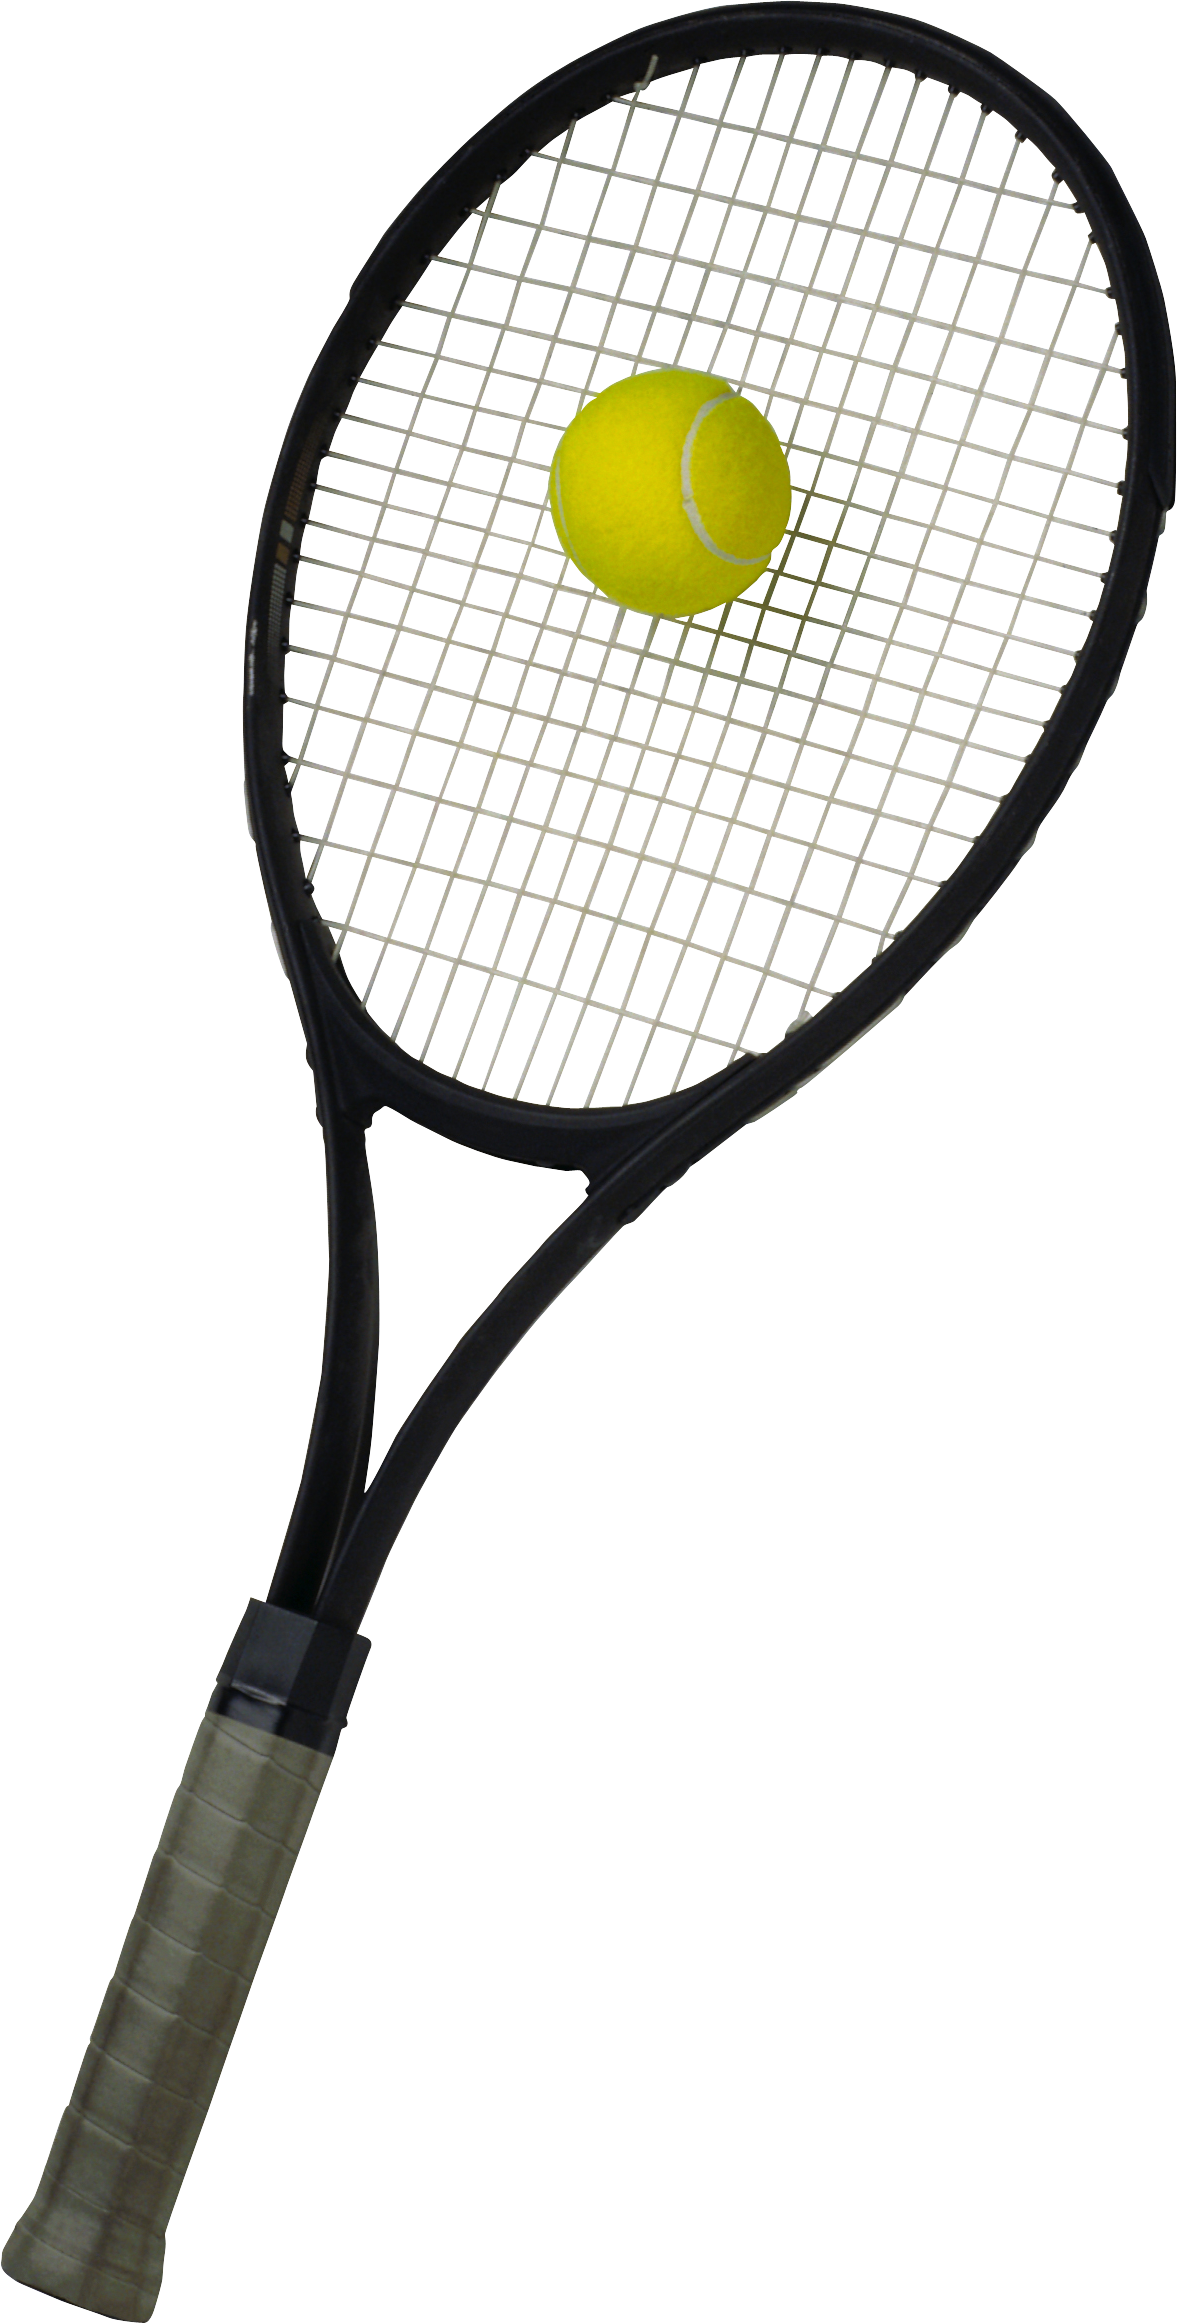 Tennis Racket with ball PNG Image